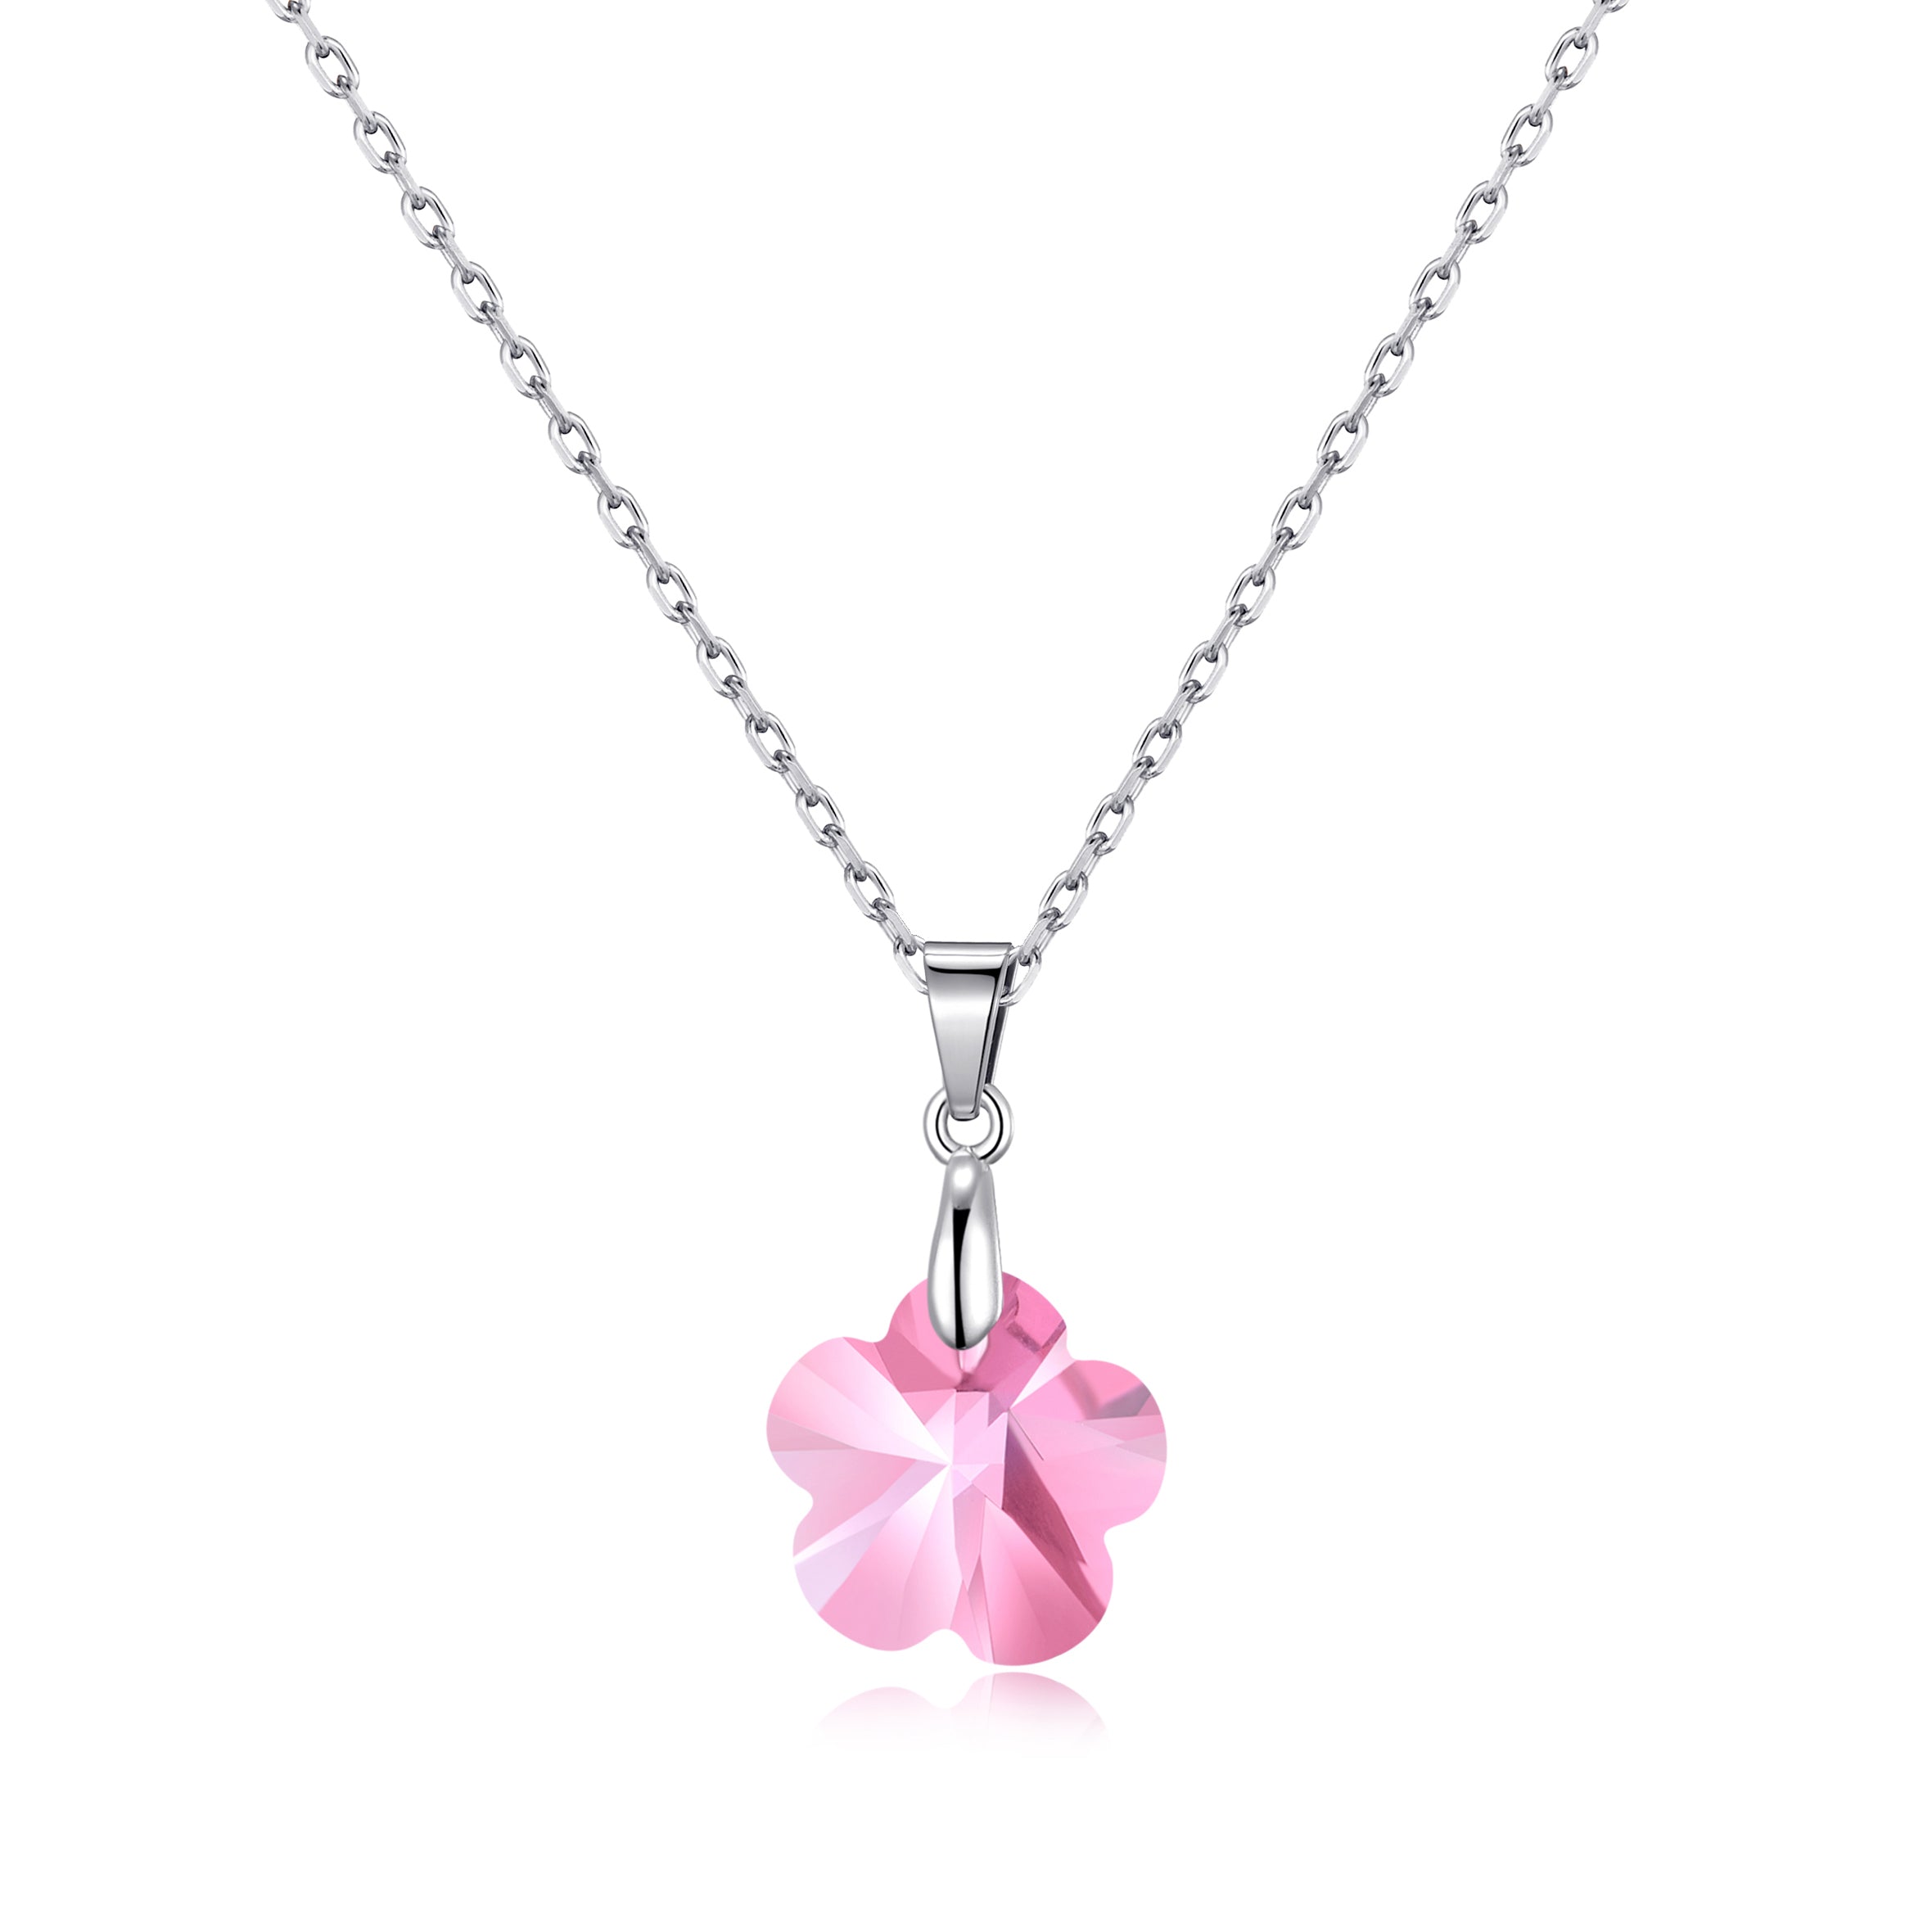 Sterling Silver Light Rose Flower Necklace Created with Zircondia® Crystals by Philip Jones Jewellery